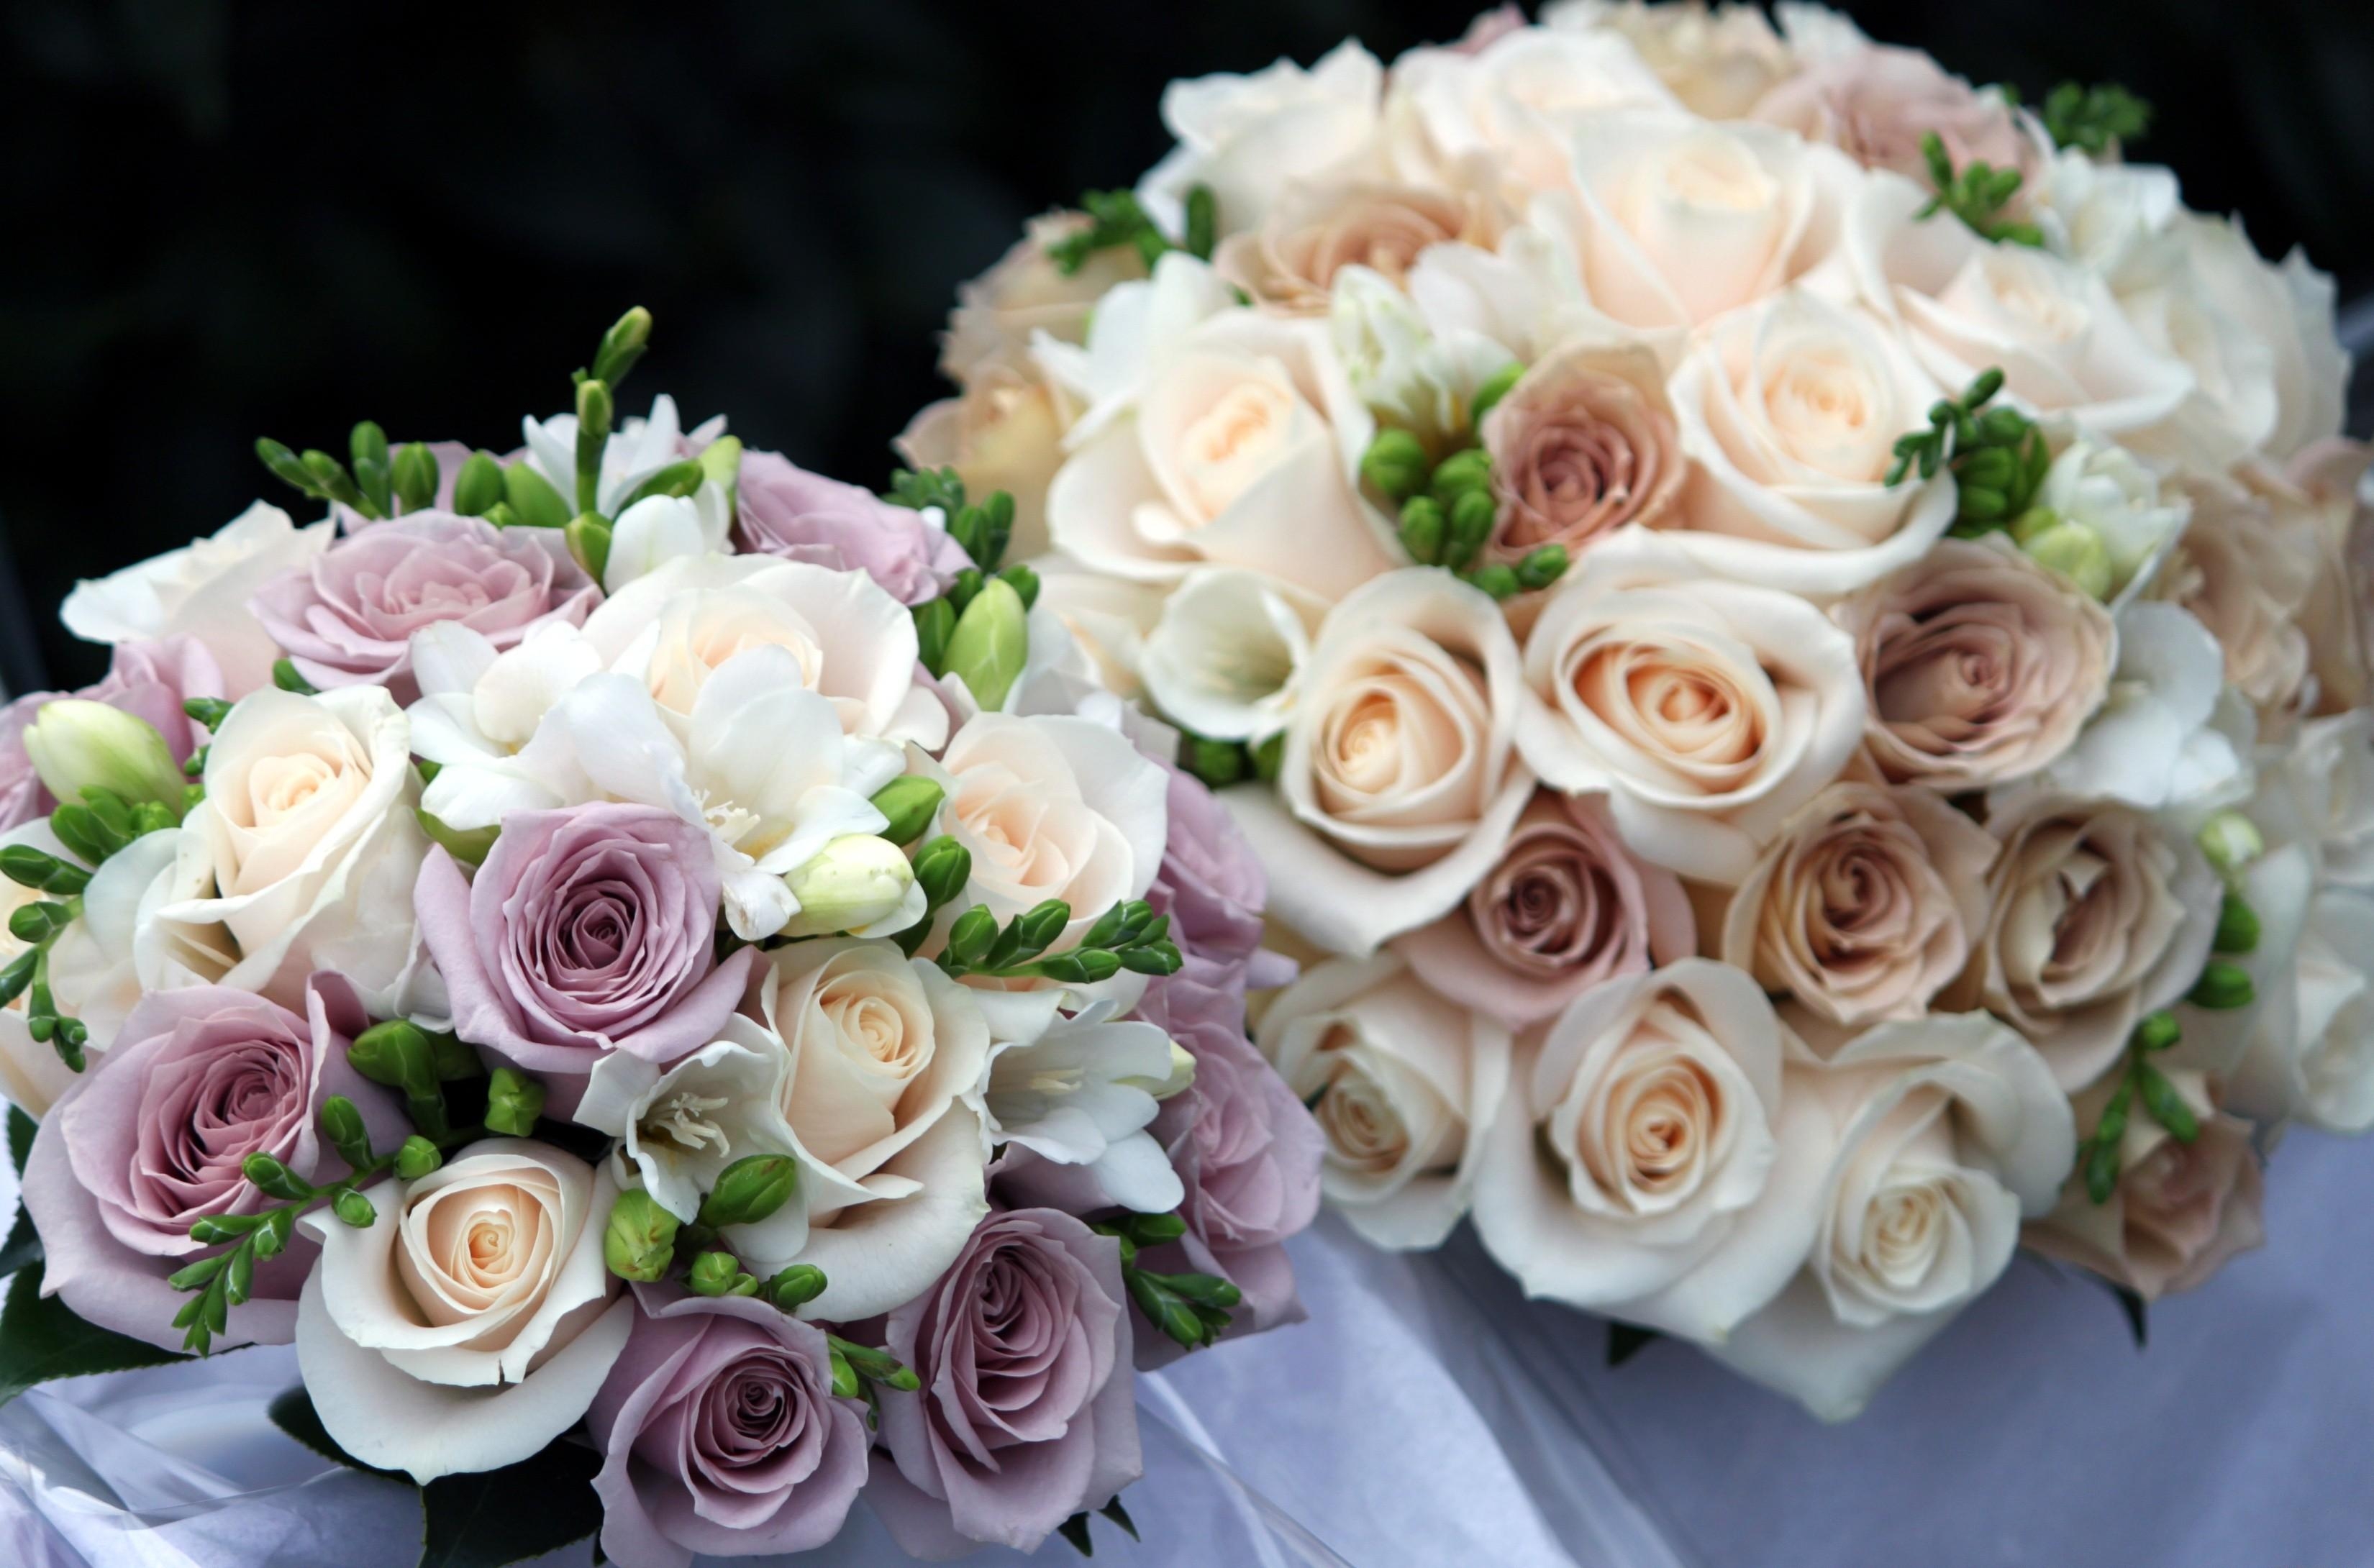 flowers, roses, beauty, bridal bouquets, wedding bouquets iphone wallpaper